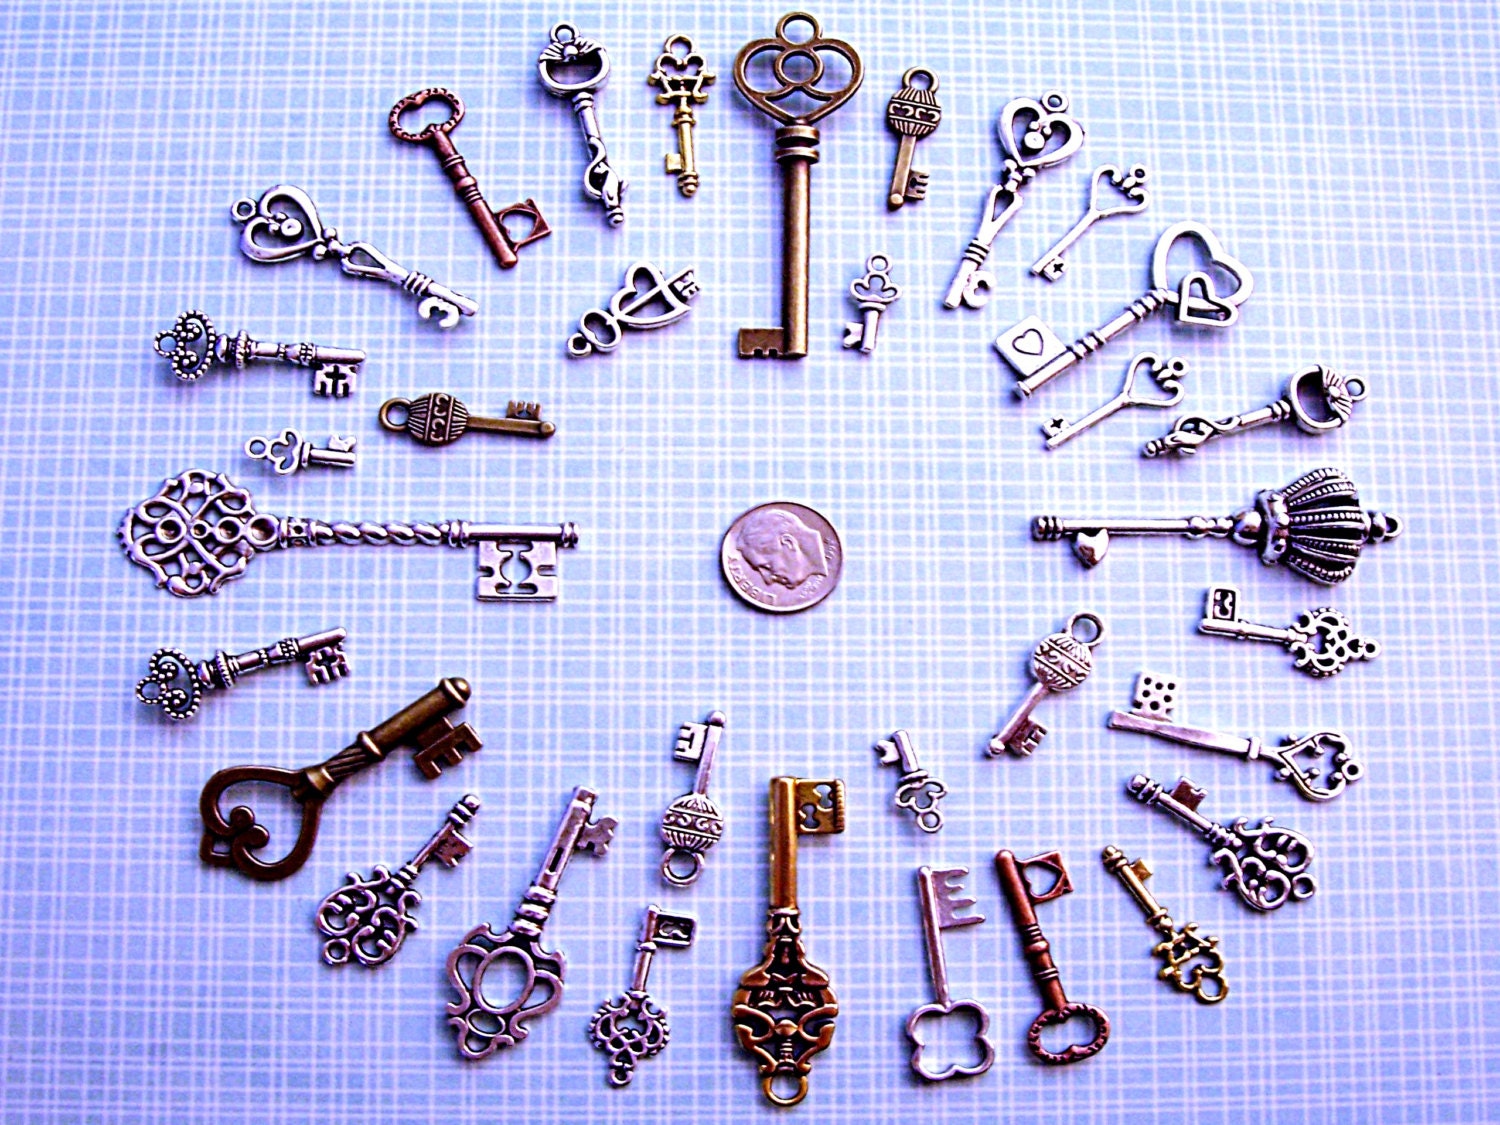 32 Skeleton Keys New Heart Charms Jewelry Steampunk Wedding Beads Supplies Pendant Bulk Collection Reproduction Vintage Antique Look Crafts